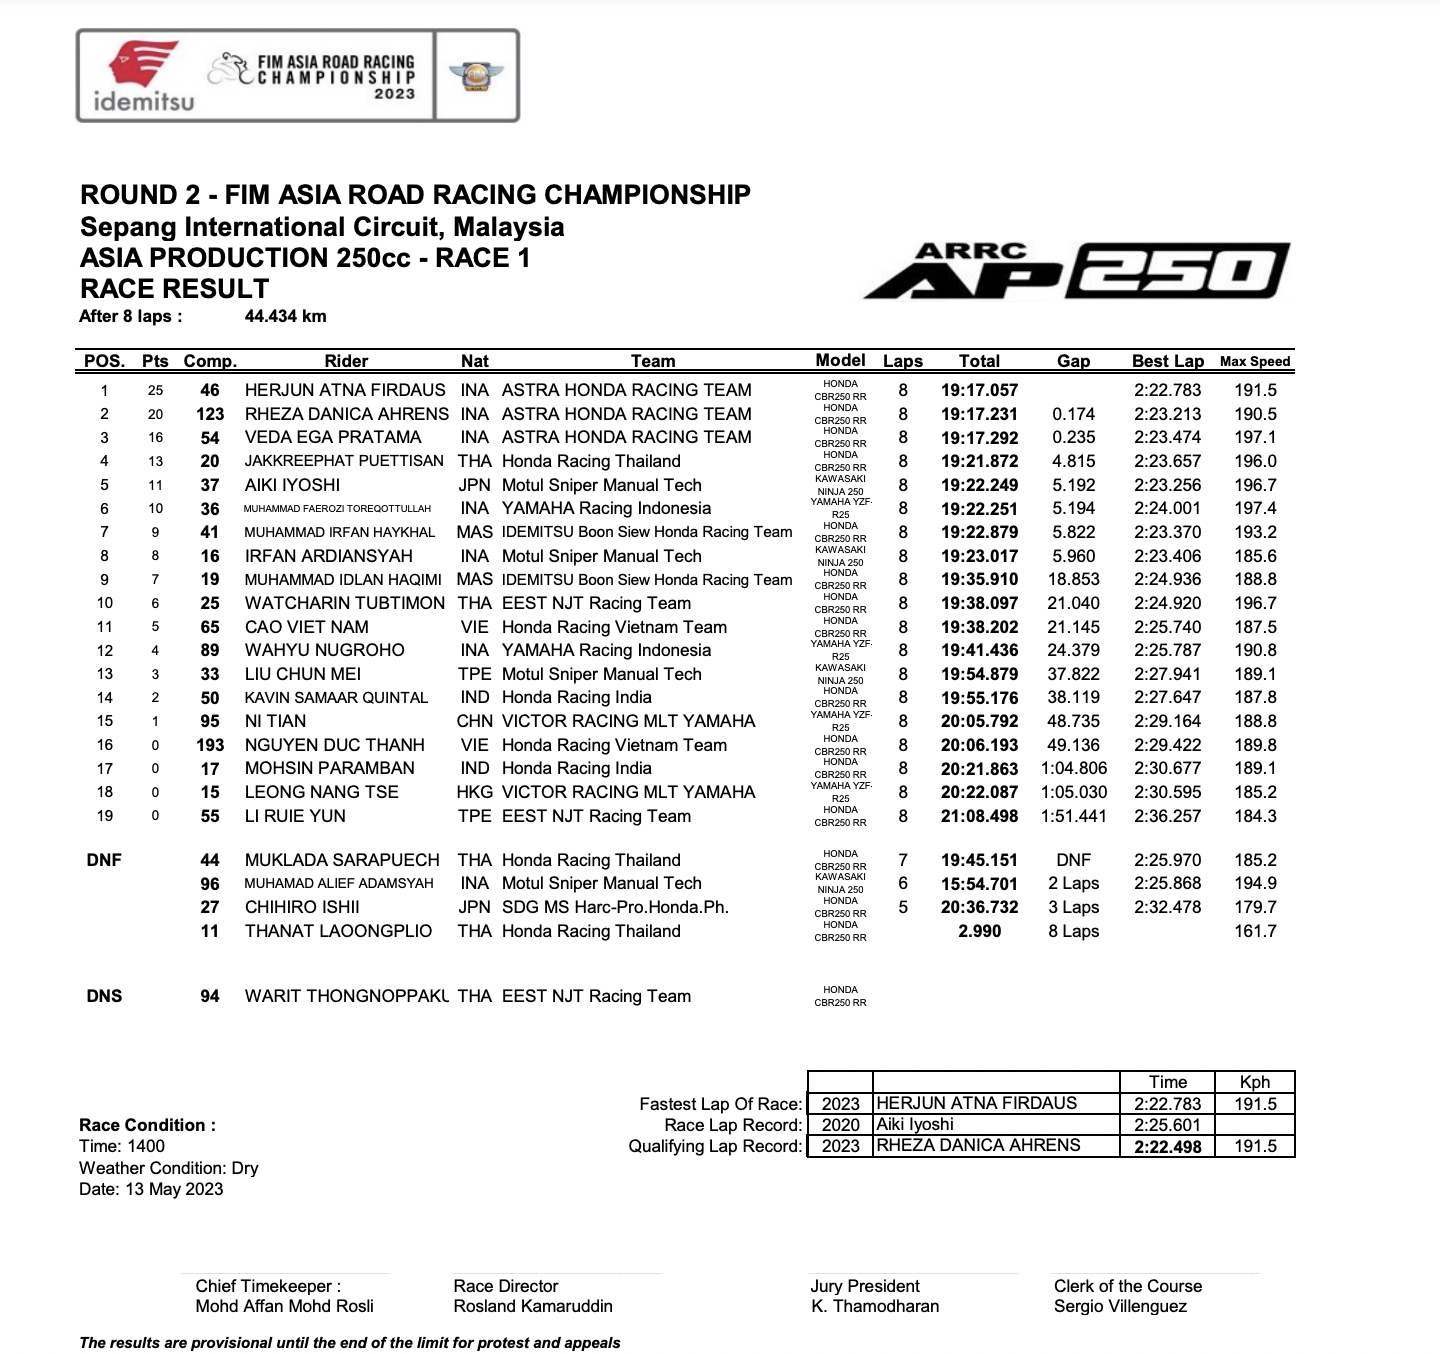 Race 1 Results Stage 2 ARRC 2023: Nguyễn Anh Tuấn surprised with a top 10 finish - arrc-2023-race-1-02.png